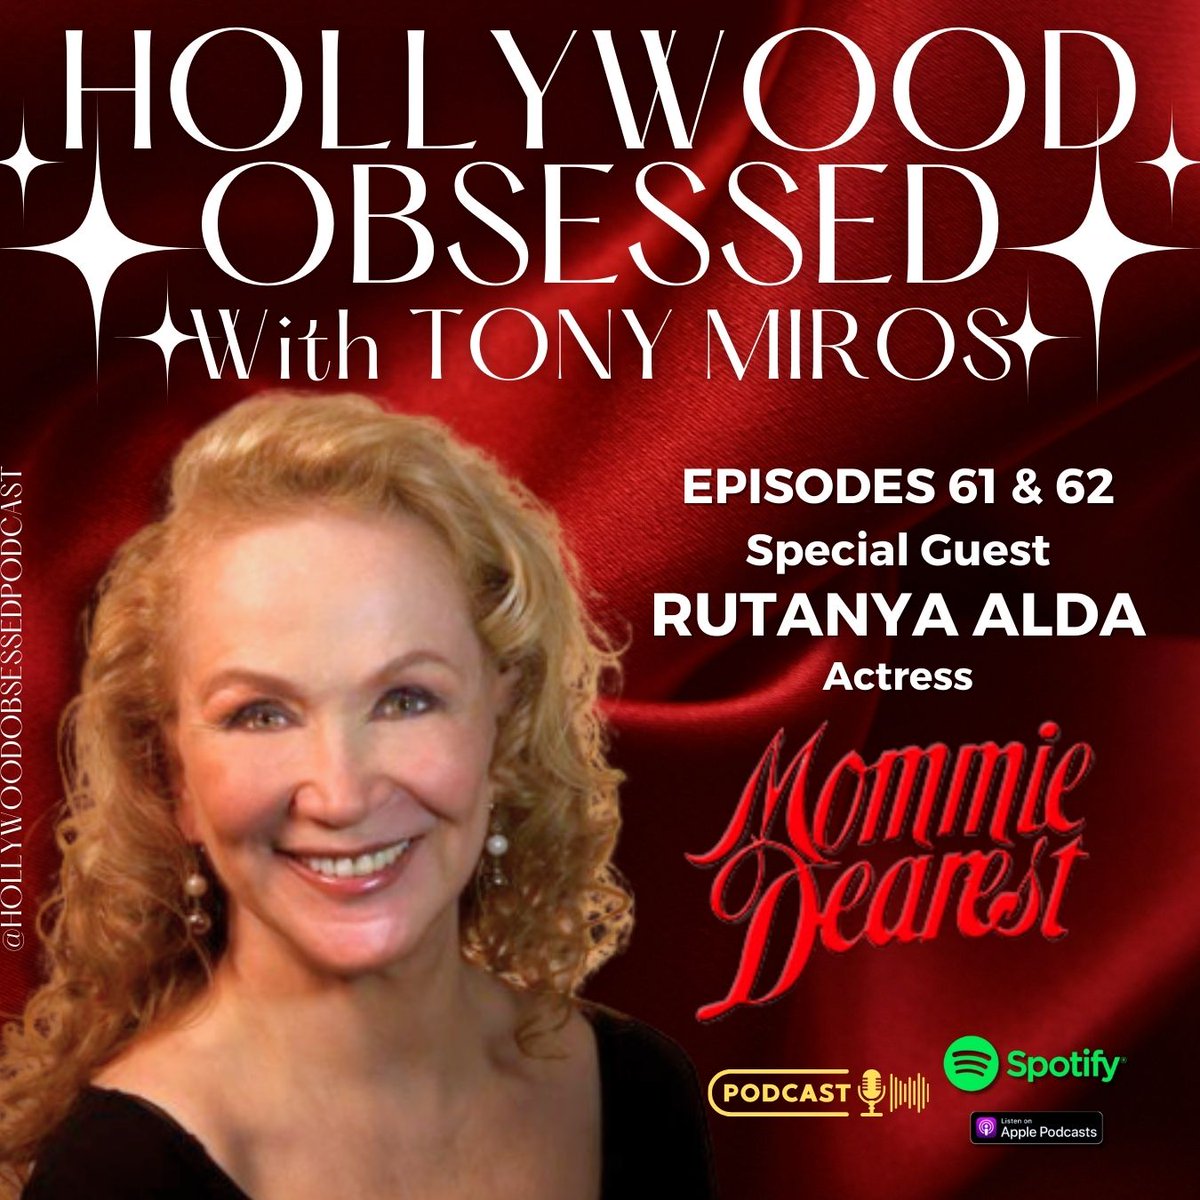 Have you listened 2 the 2 new episodes of @HLWDobsessed featuring actress #RytanyaAlda yet? She tells podcast host @tonymiros filming the movie #mommiedearest & her book #themommiedeaerestdiarycarolanntellsall ! Listen now! hollywoodobsessedthepodcast.com/guests/rutanya…